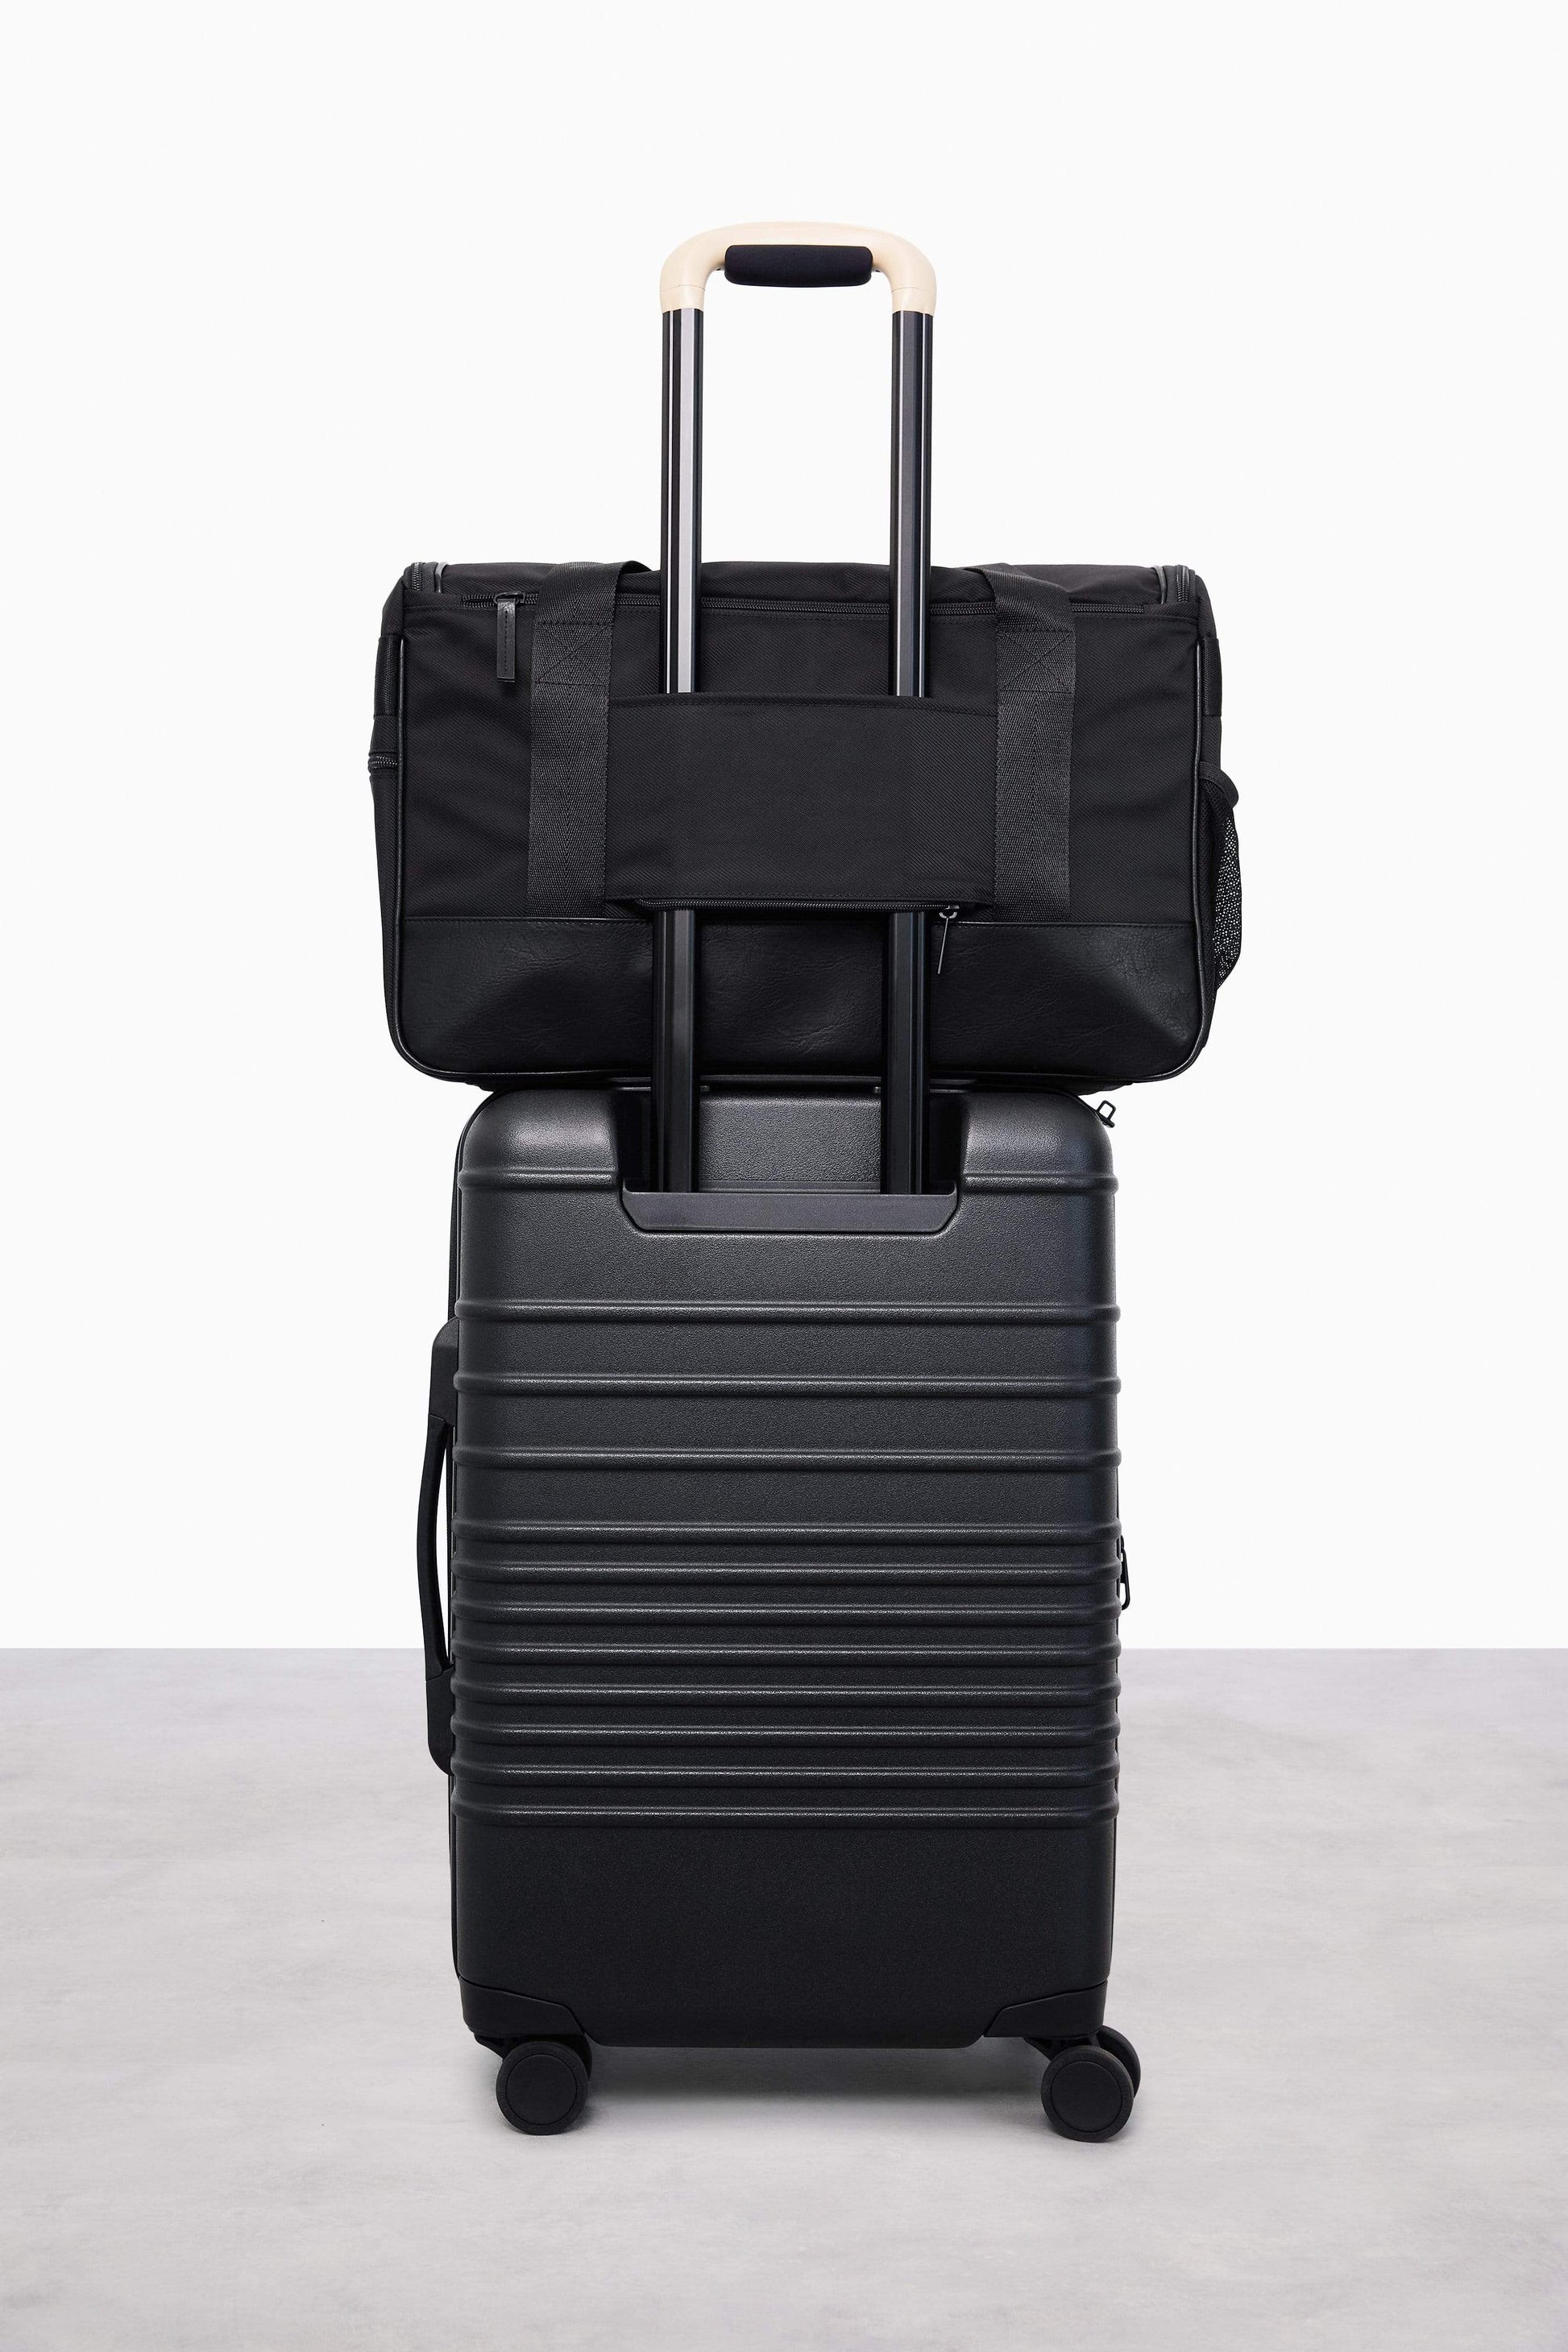 Hanging Duffle Black Trolley Passthrough with Luggage